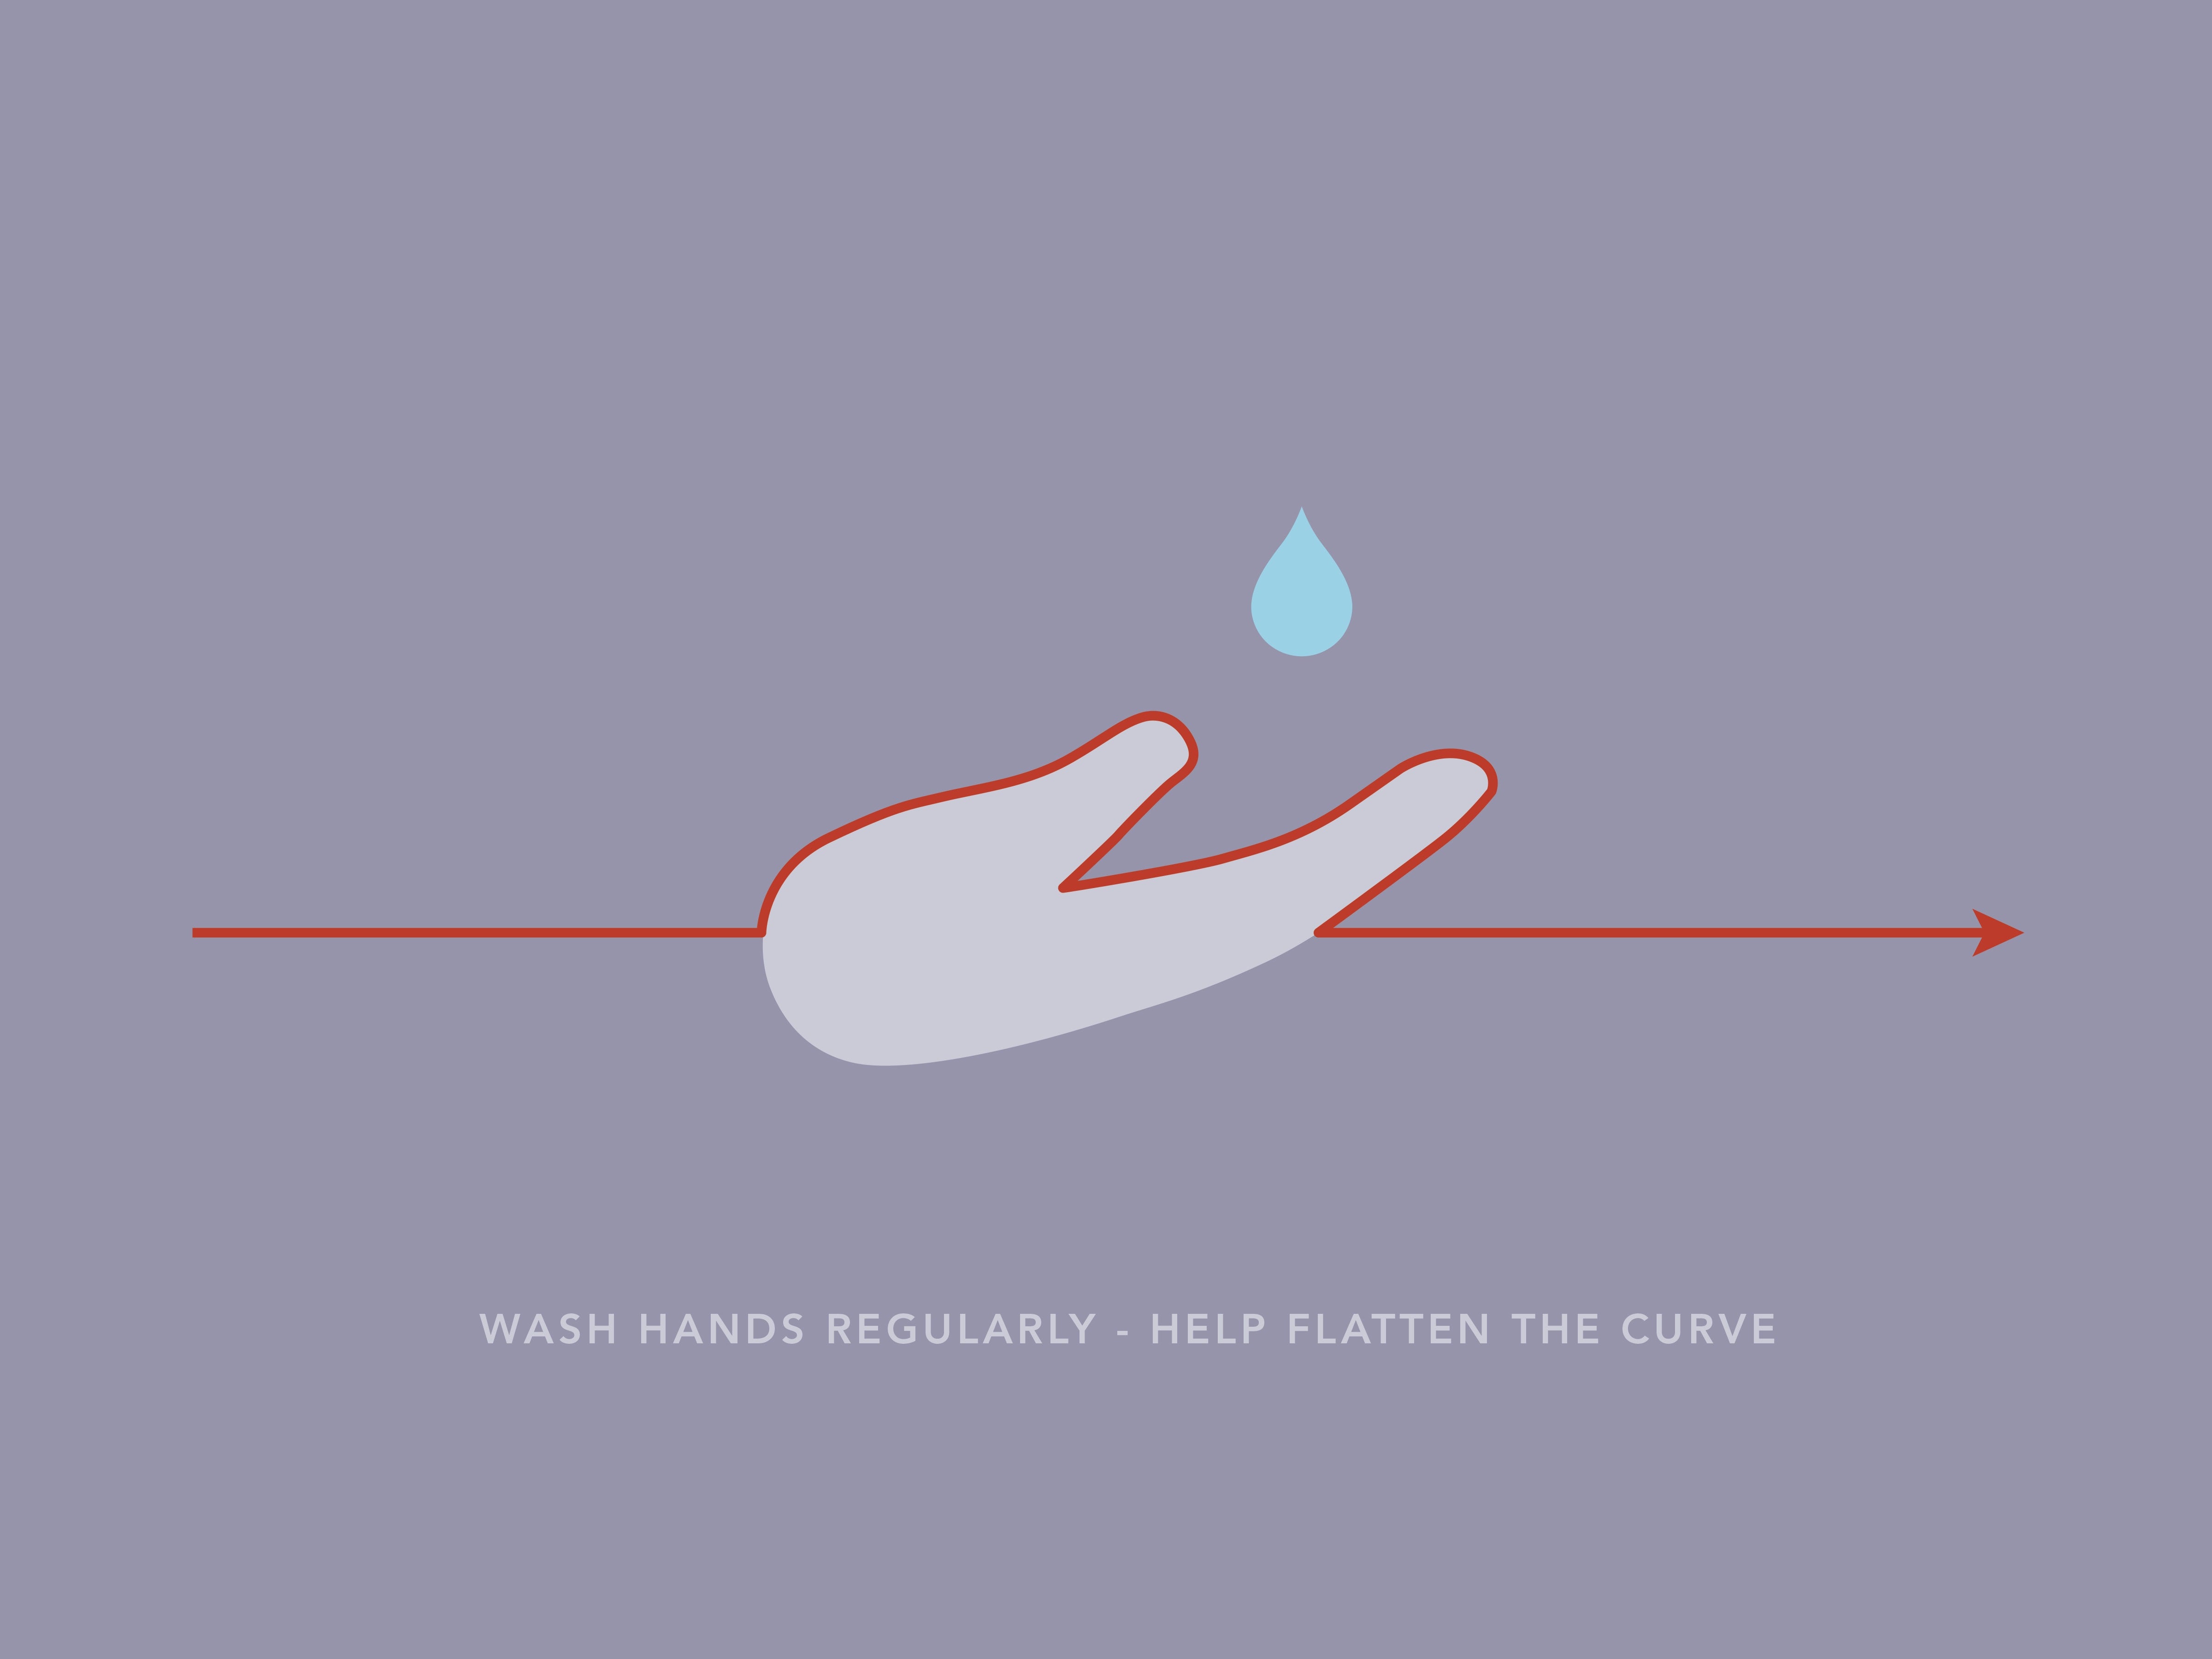 Wash hands regularly, help flatten the curve. Image created by Jack Adamson. Submitted for United Nations Global Call Out To Creatives - help stop the spread of COVID-19.